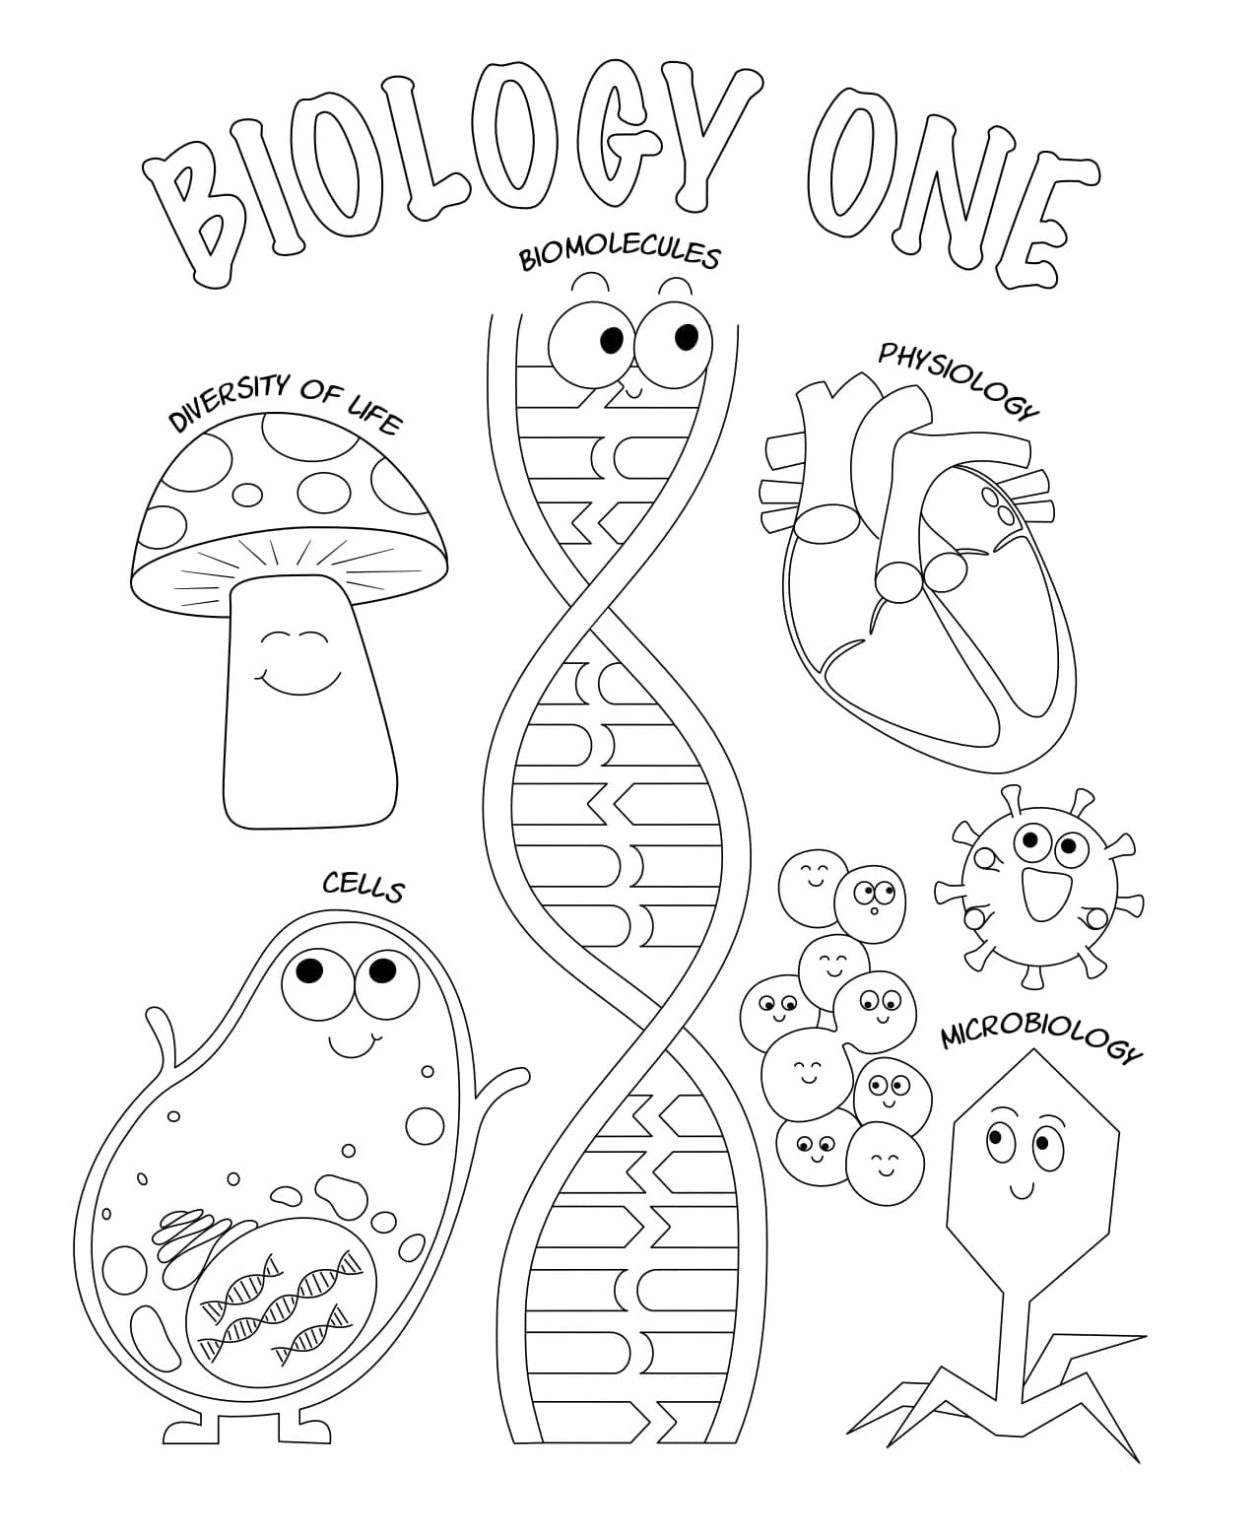 Printable Biology Coloring Pages Free For Kids And Adults